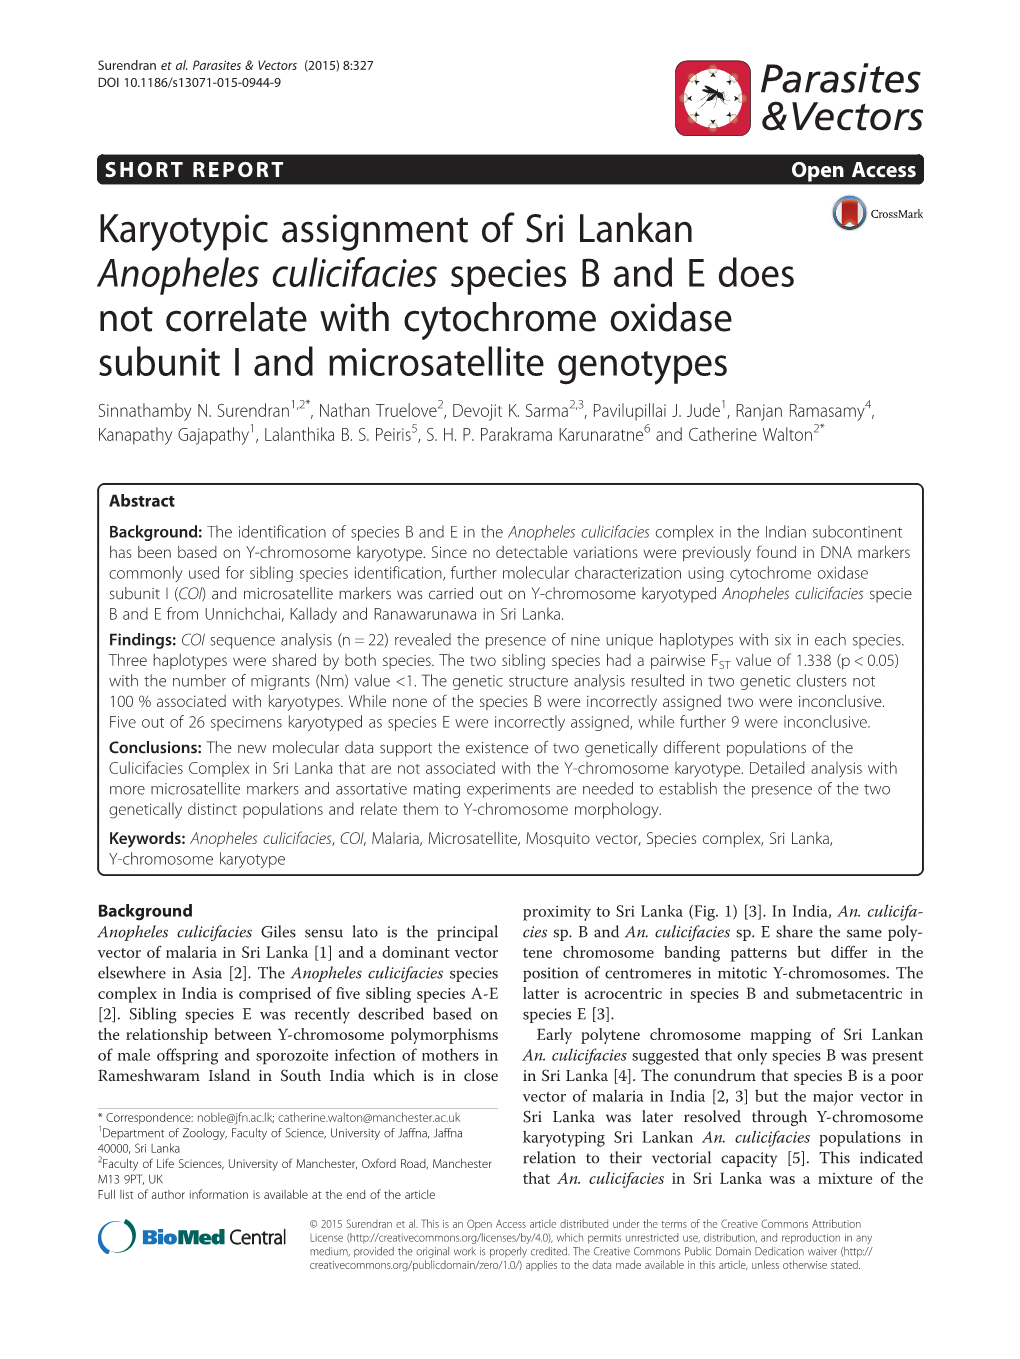 Karyotypic Assignment of Sri Lankan Anopheles Culicifacies Species B and E Does Not Correlate with Cytochrome Oxidase Subunit I